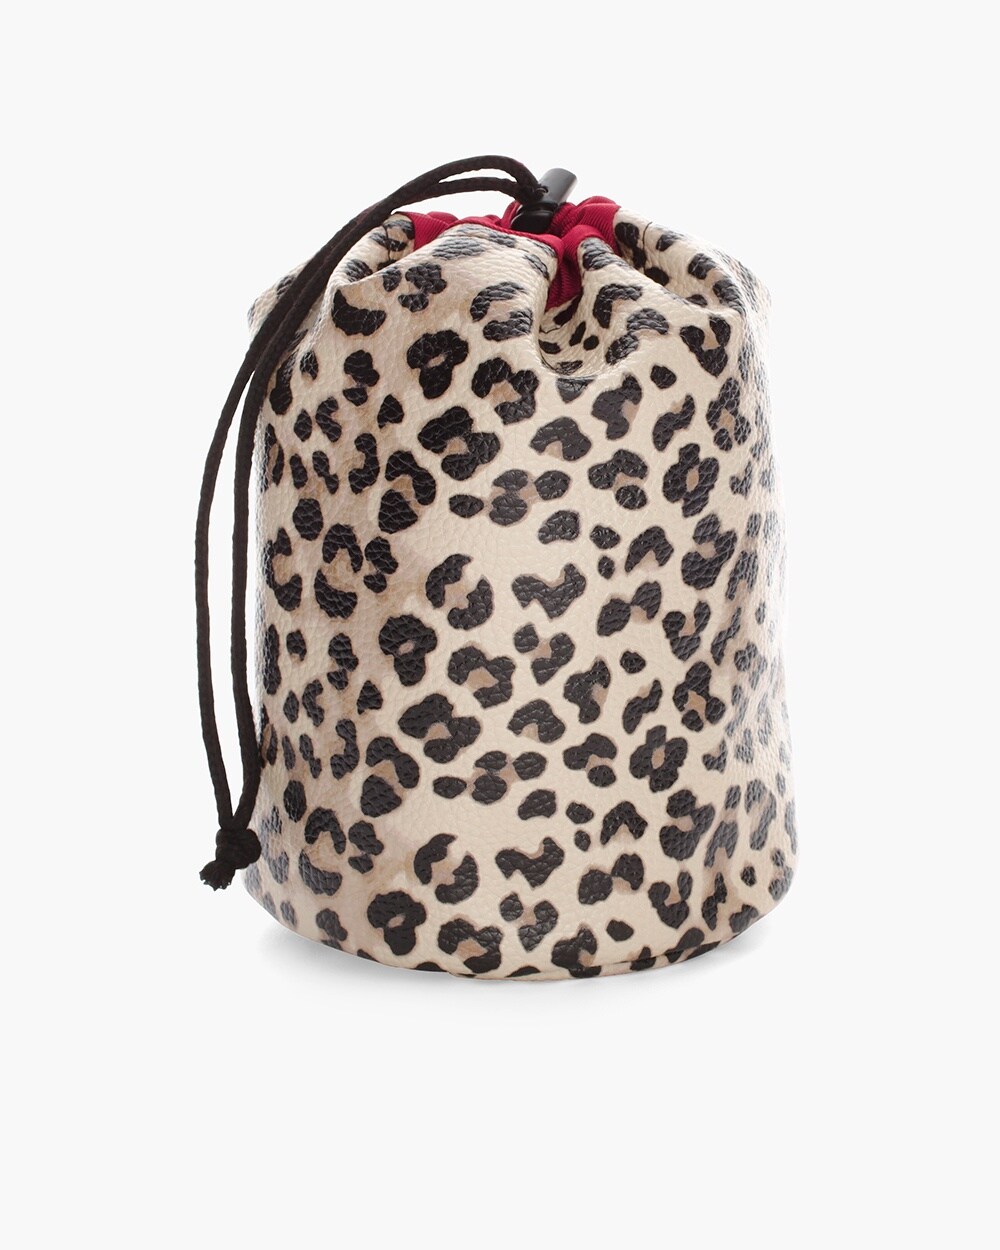 Leopard-Print Toiletry Bag - Chico's